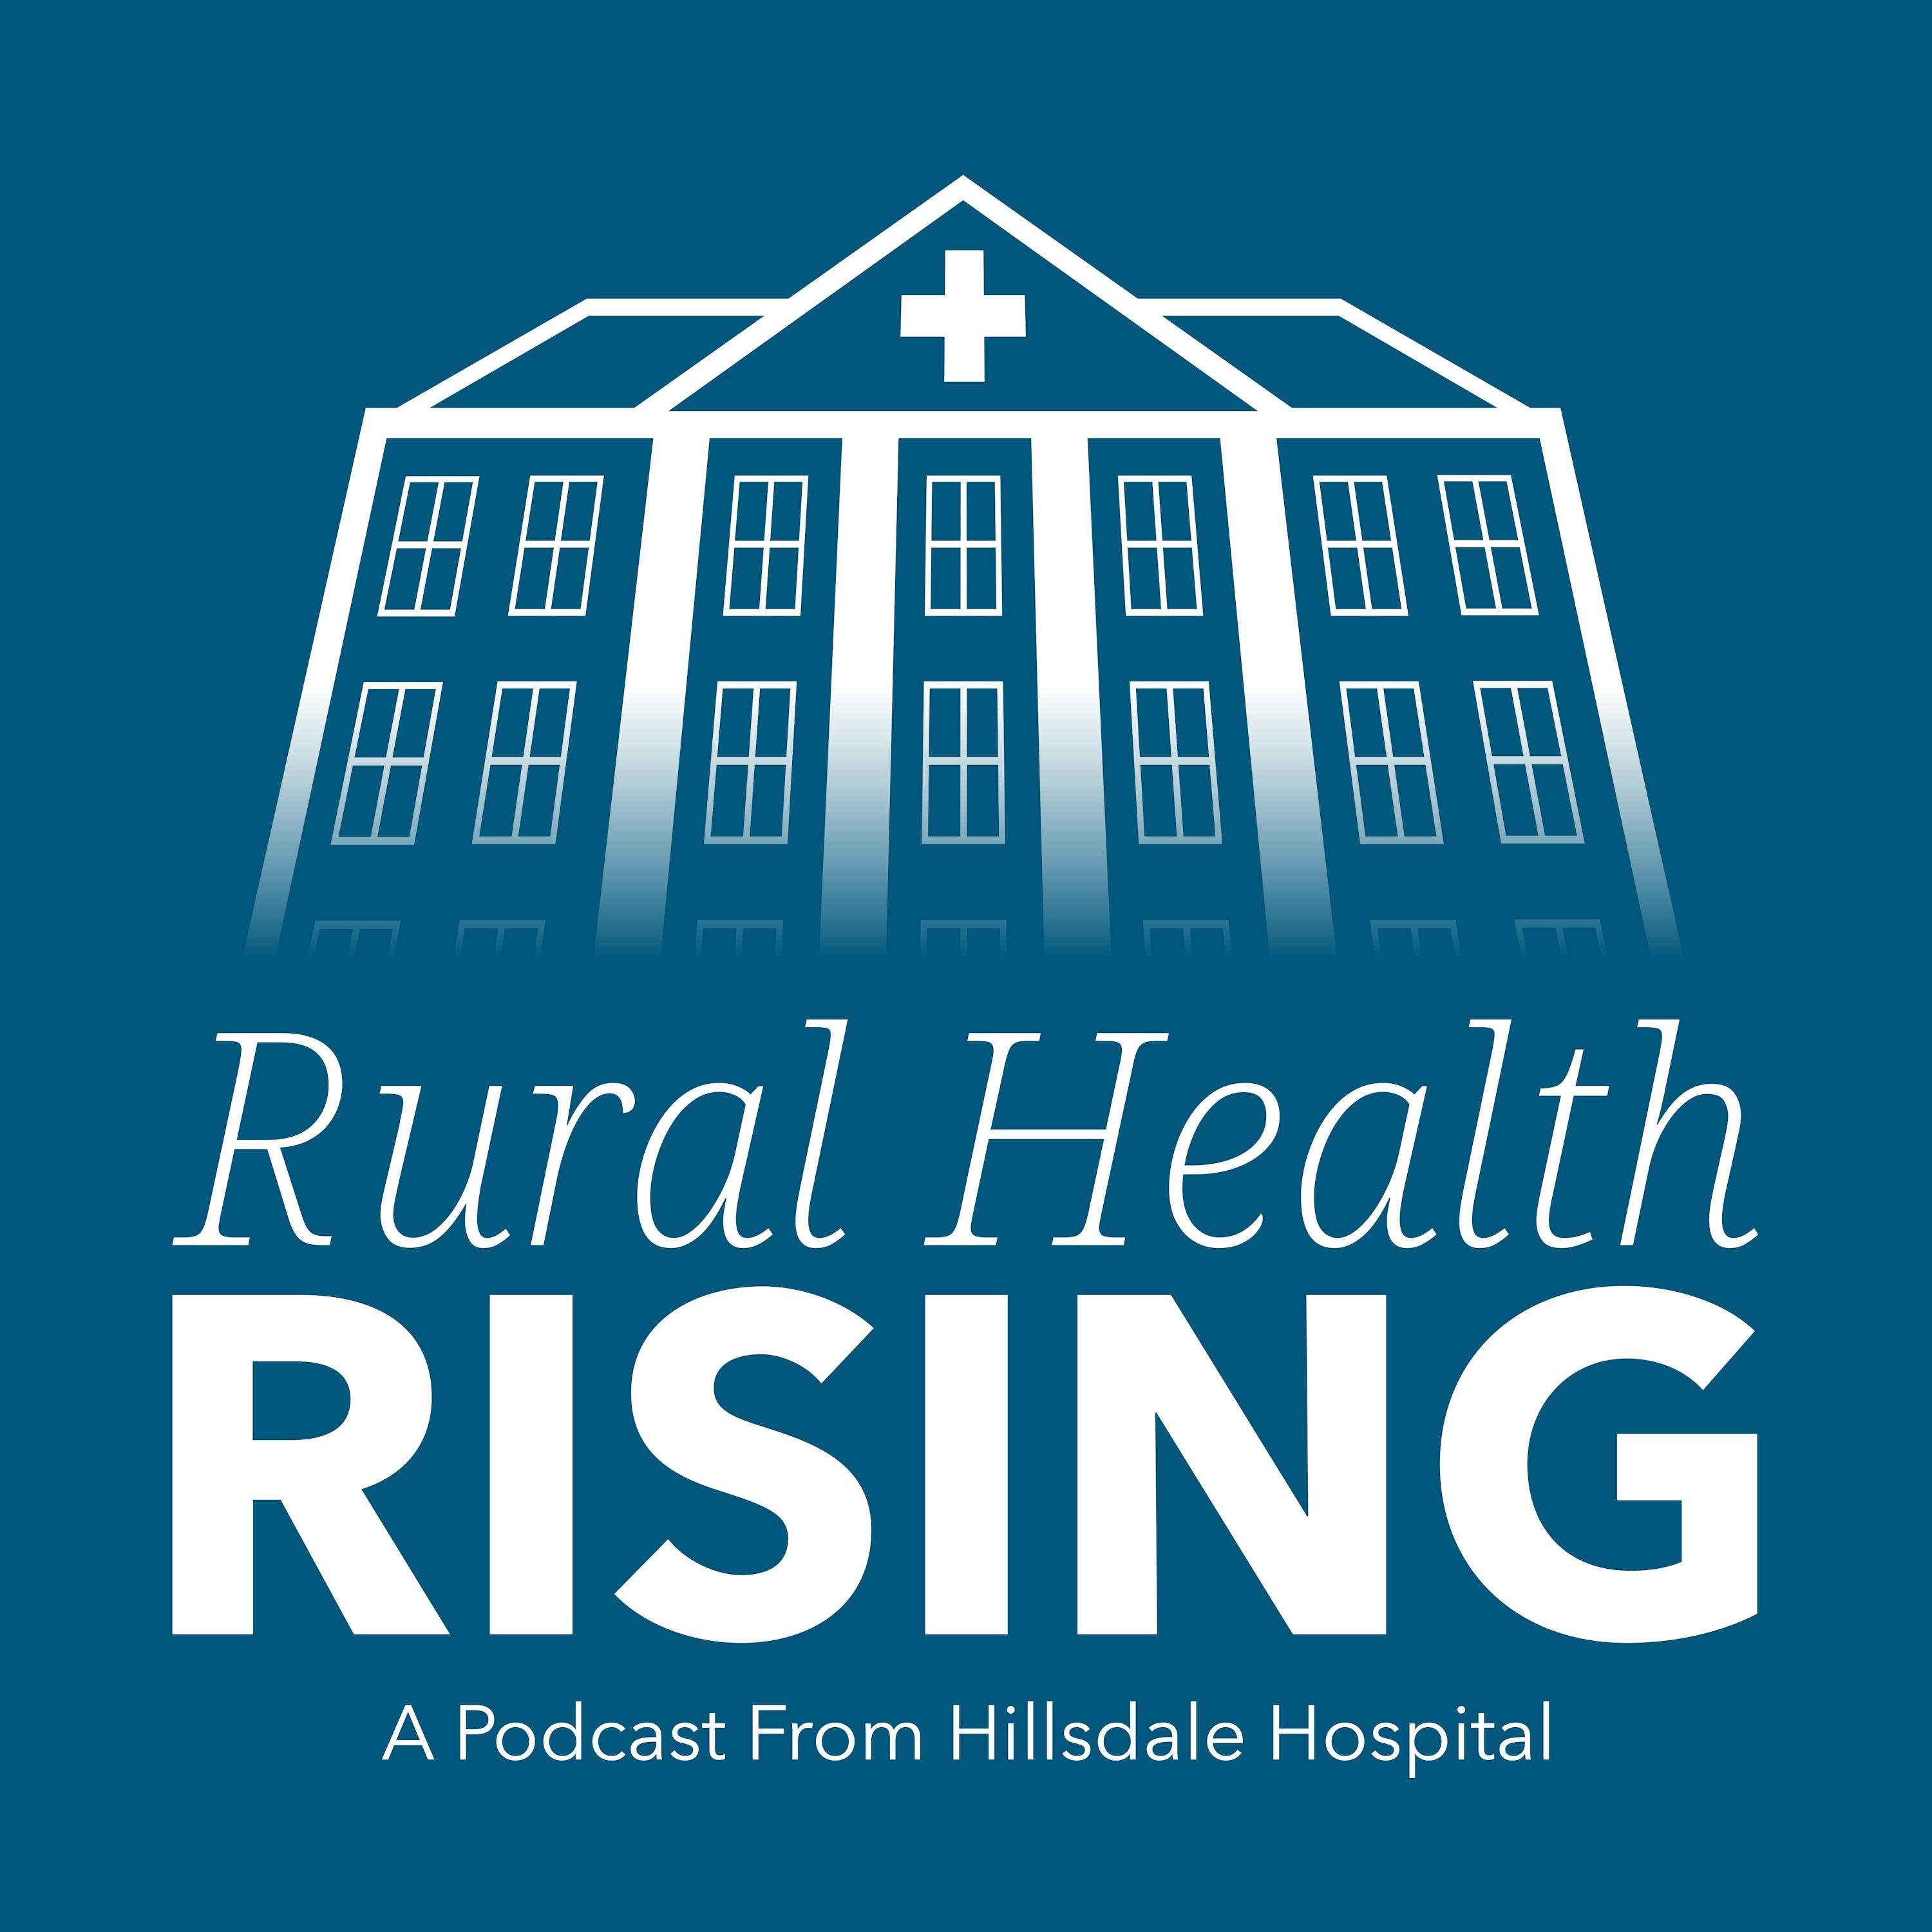 Episode 43: Population Health Research & Management with The Lincoln Project